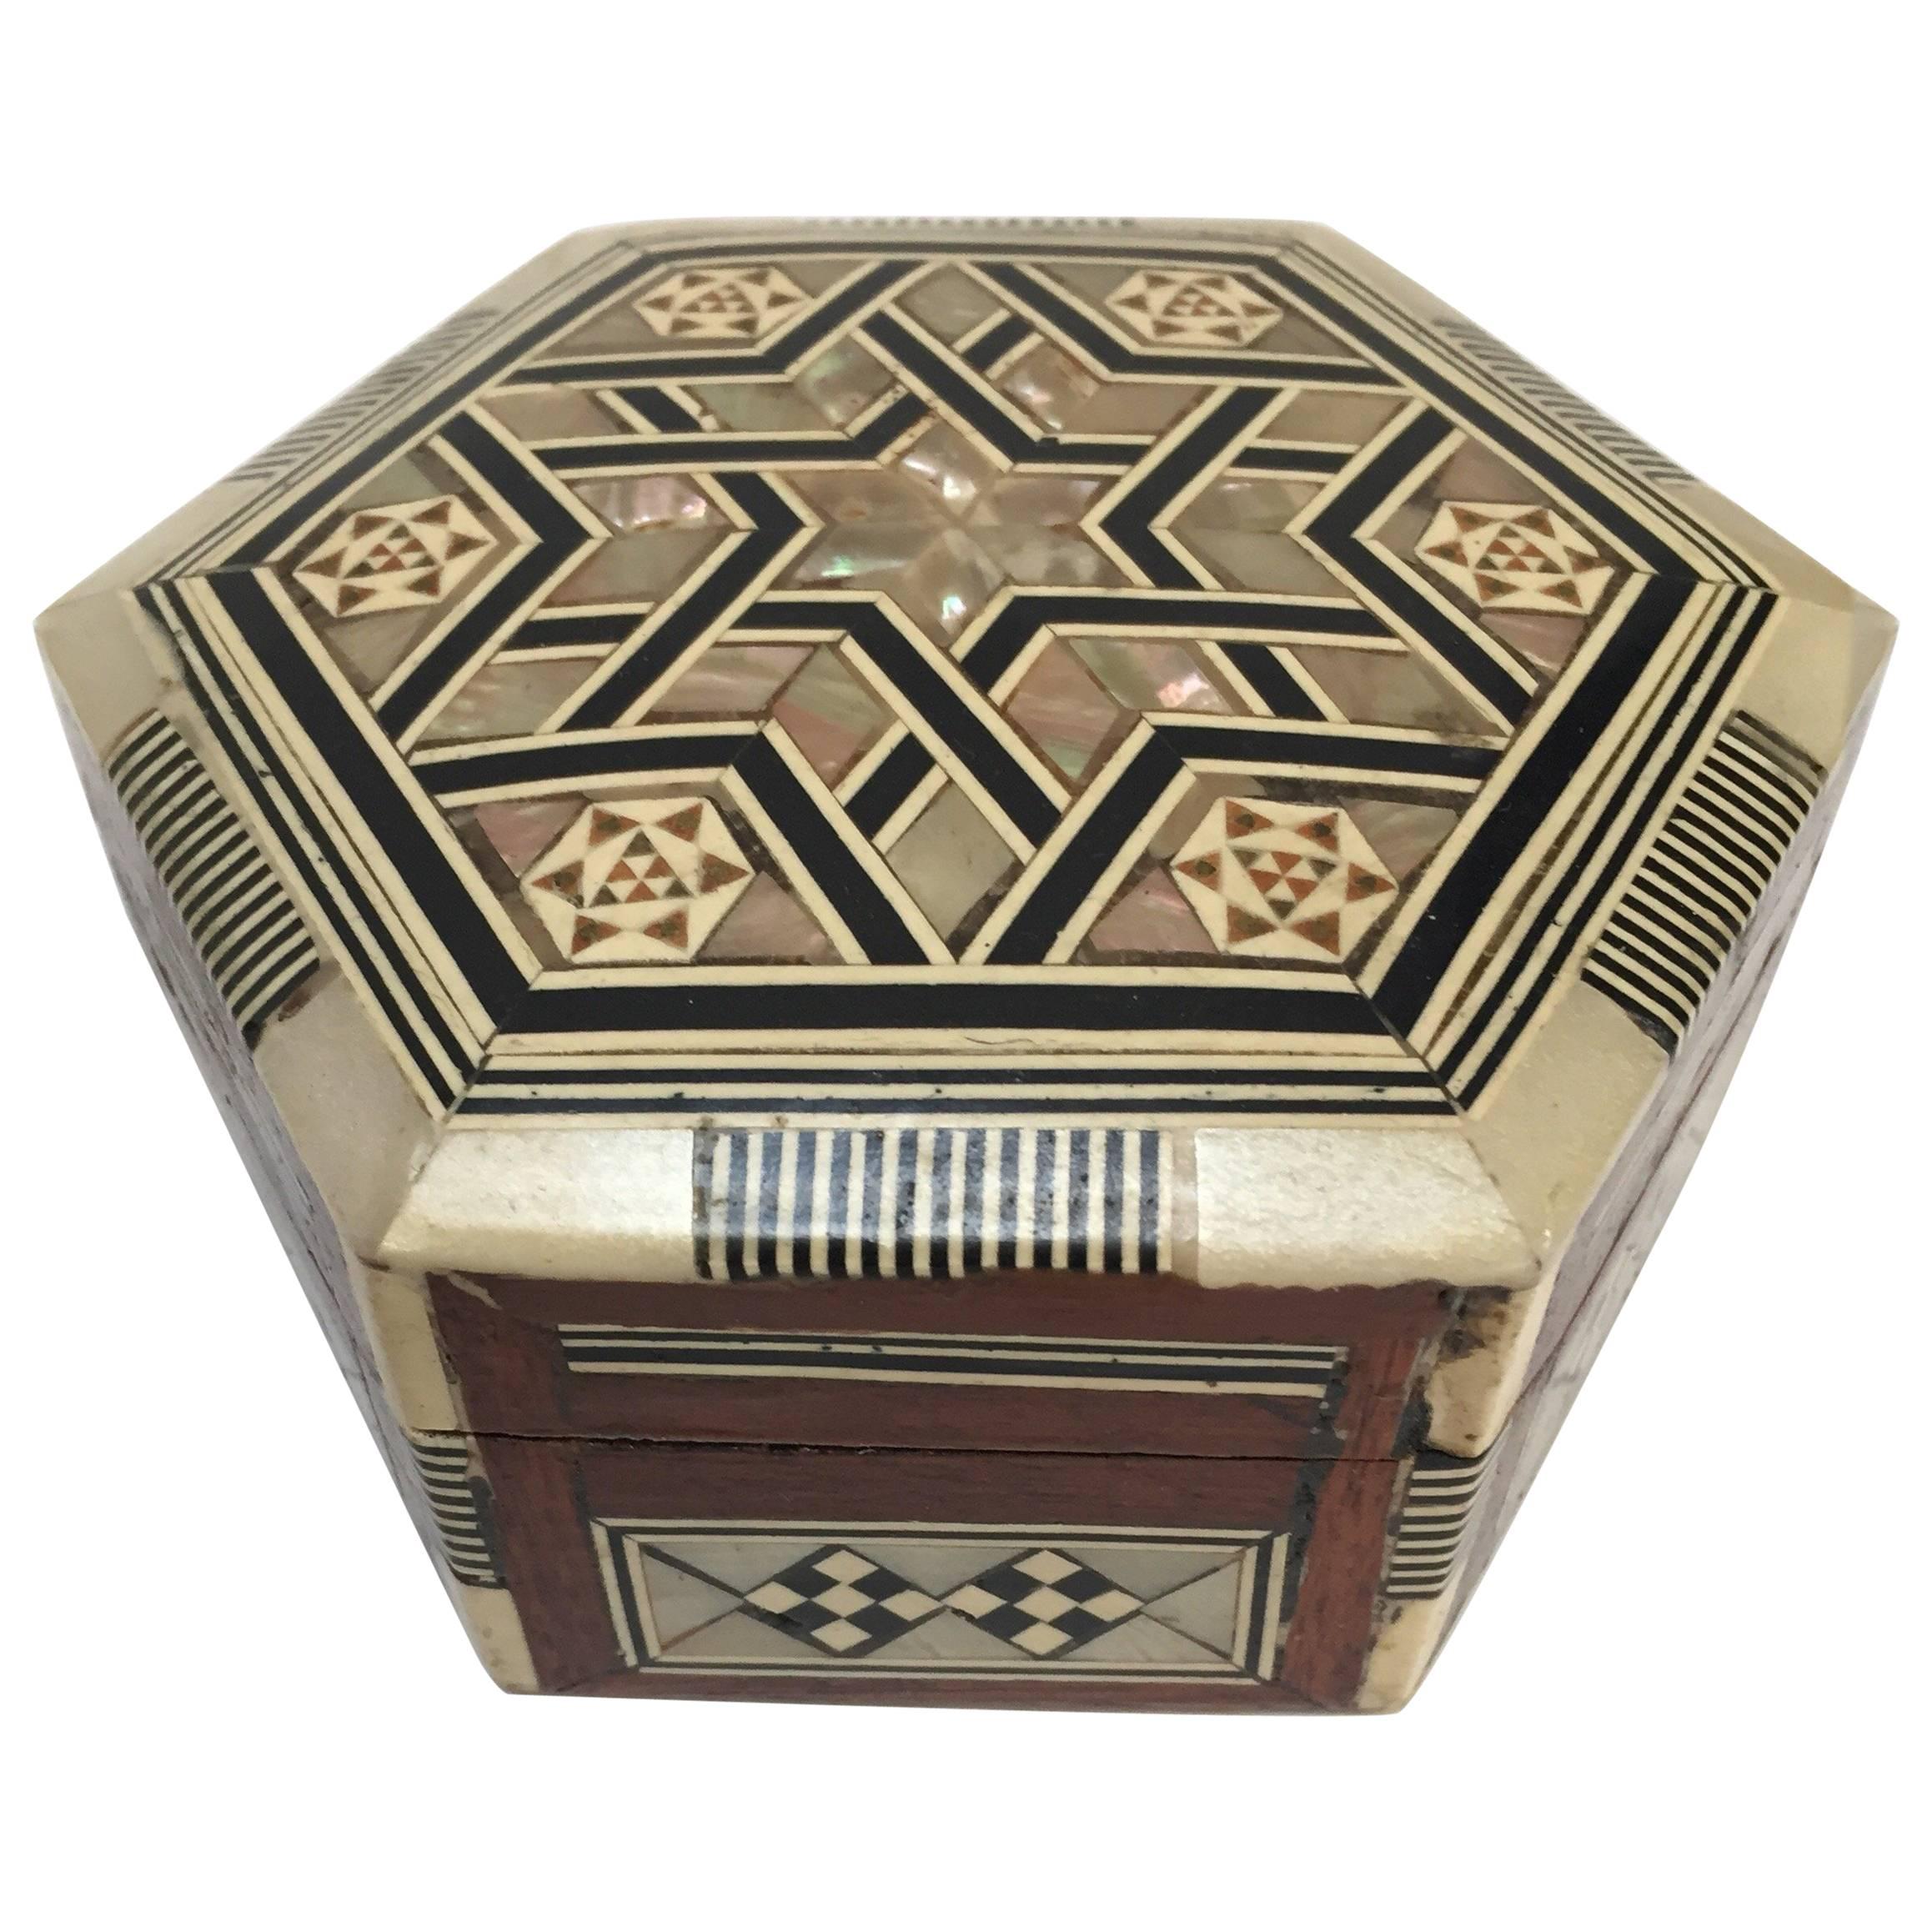 Middle Eastern Handcrafted Syrian Octagonal Box Inlaid withMother-of-Pearl